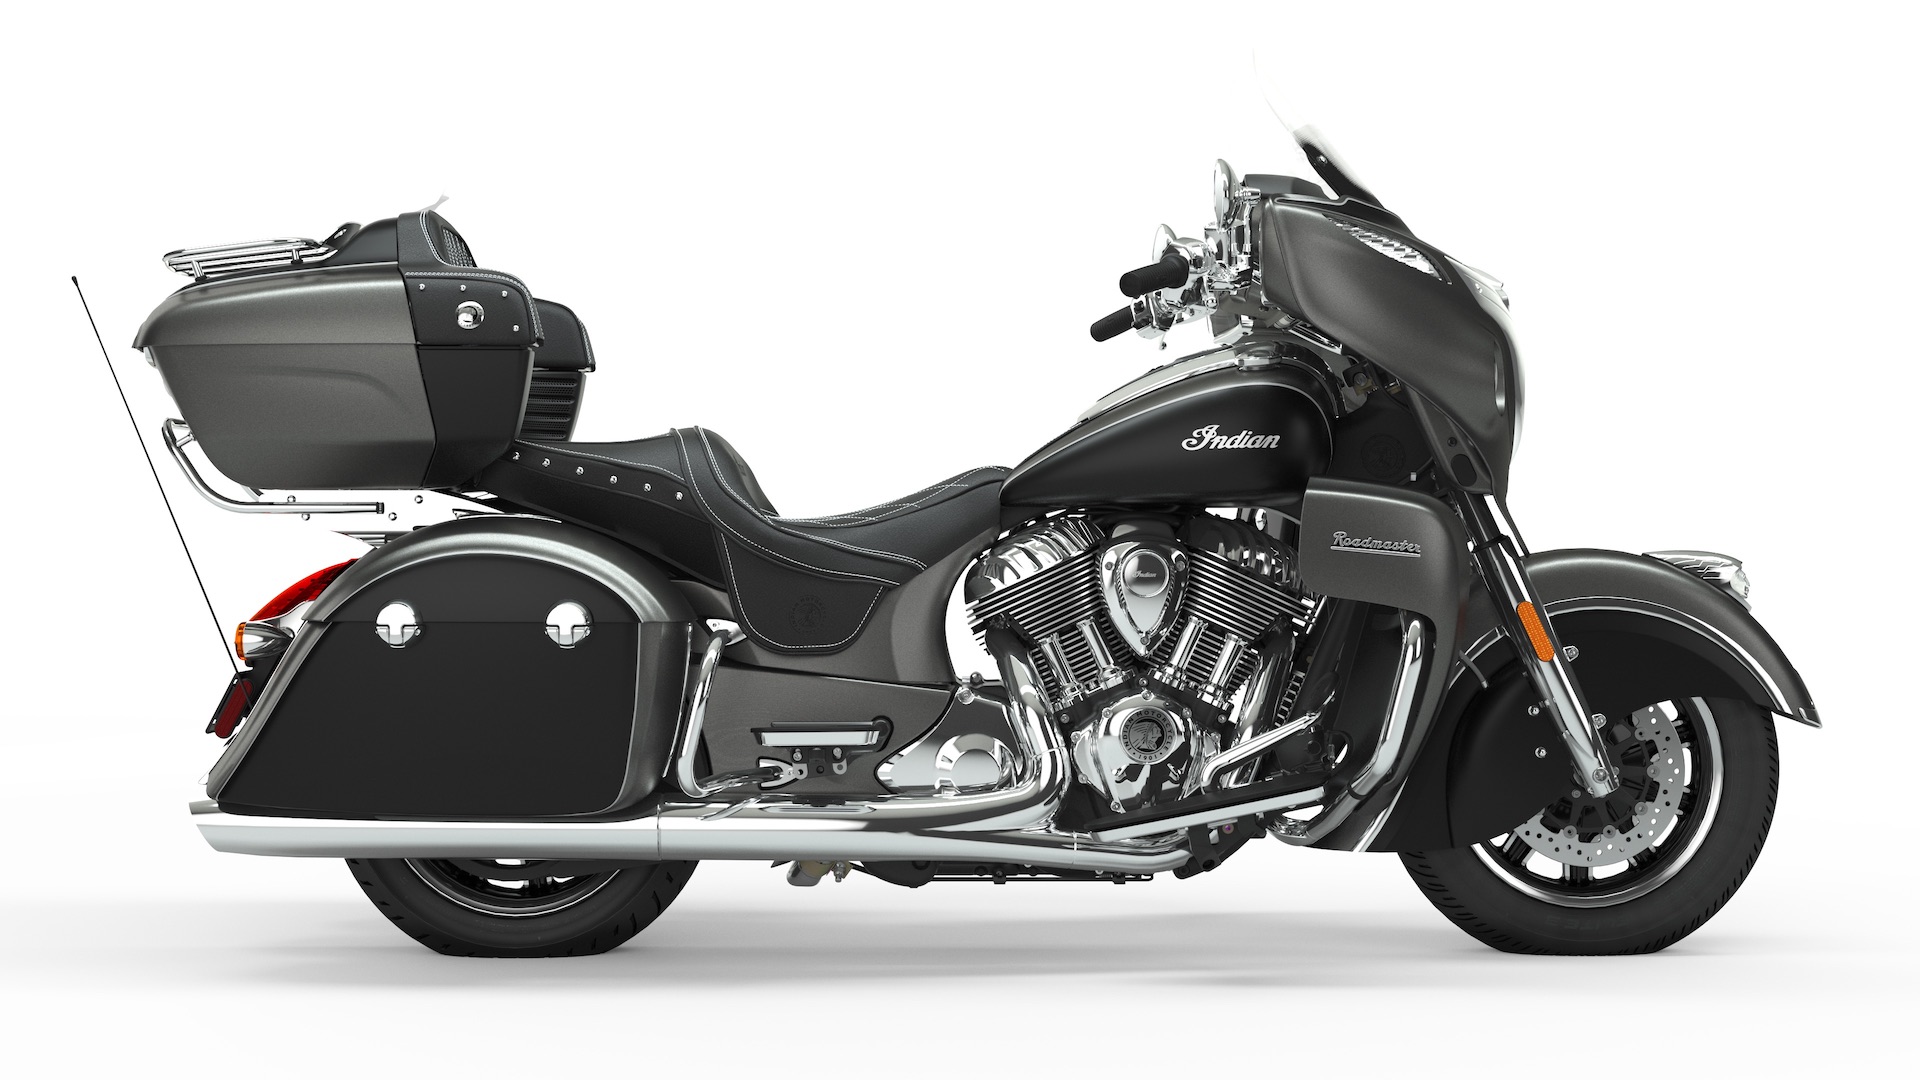 2019 Indian Roadmaster Buyers Guide Specs, Photos, Price Cycle World